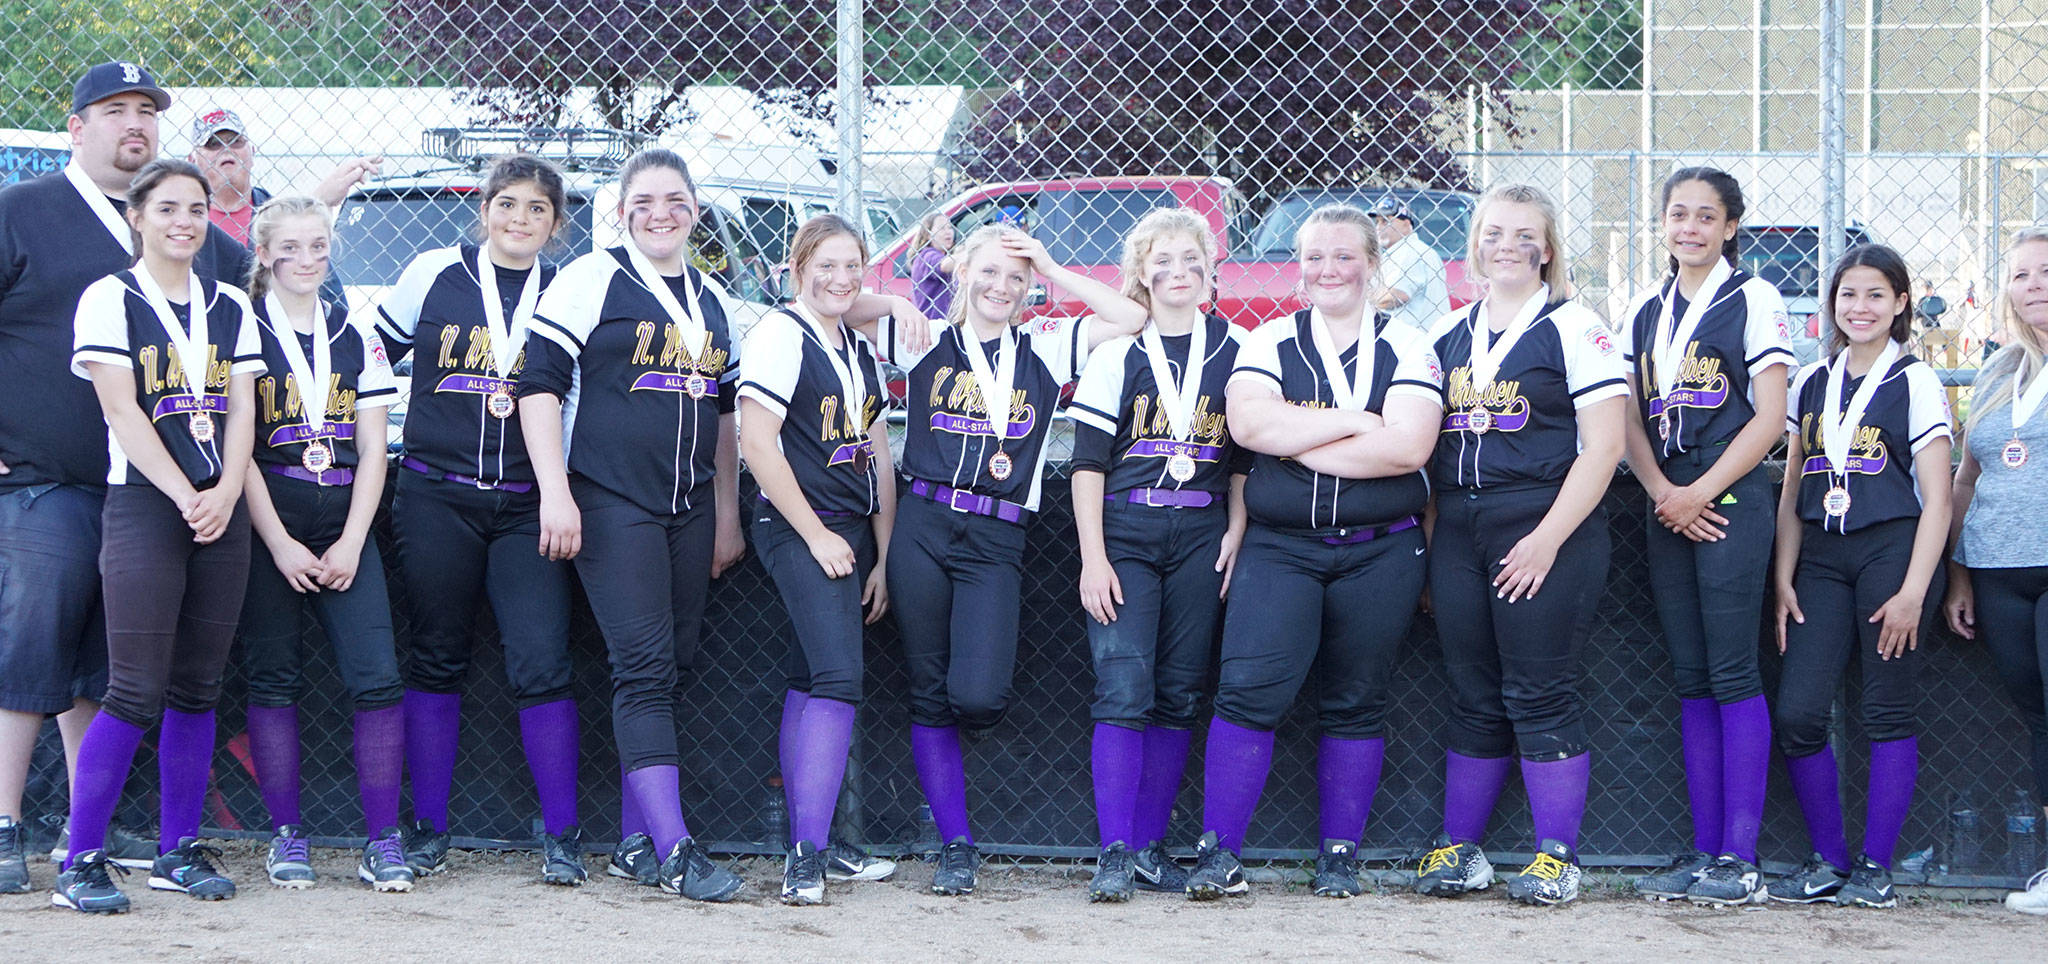 The North Whidbey Junior Softball team shows off their state medals. (Photo submitted by Gerry Oliver)